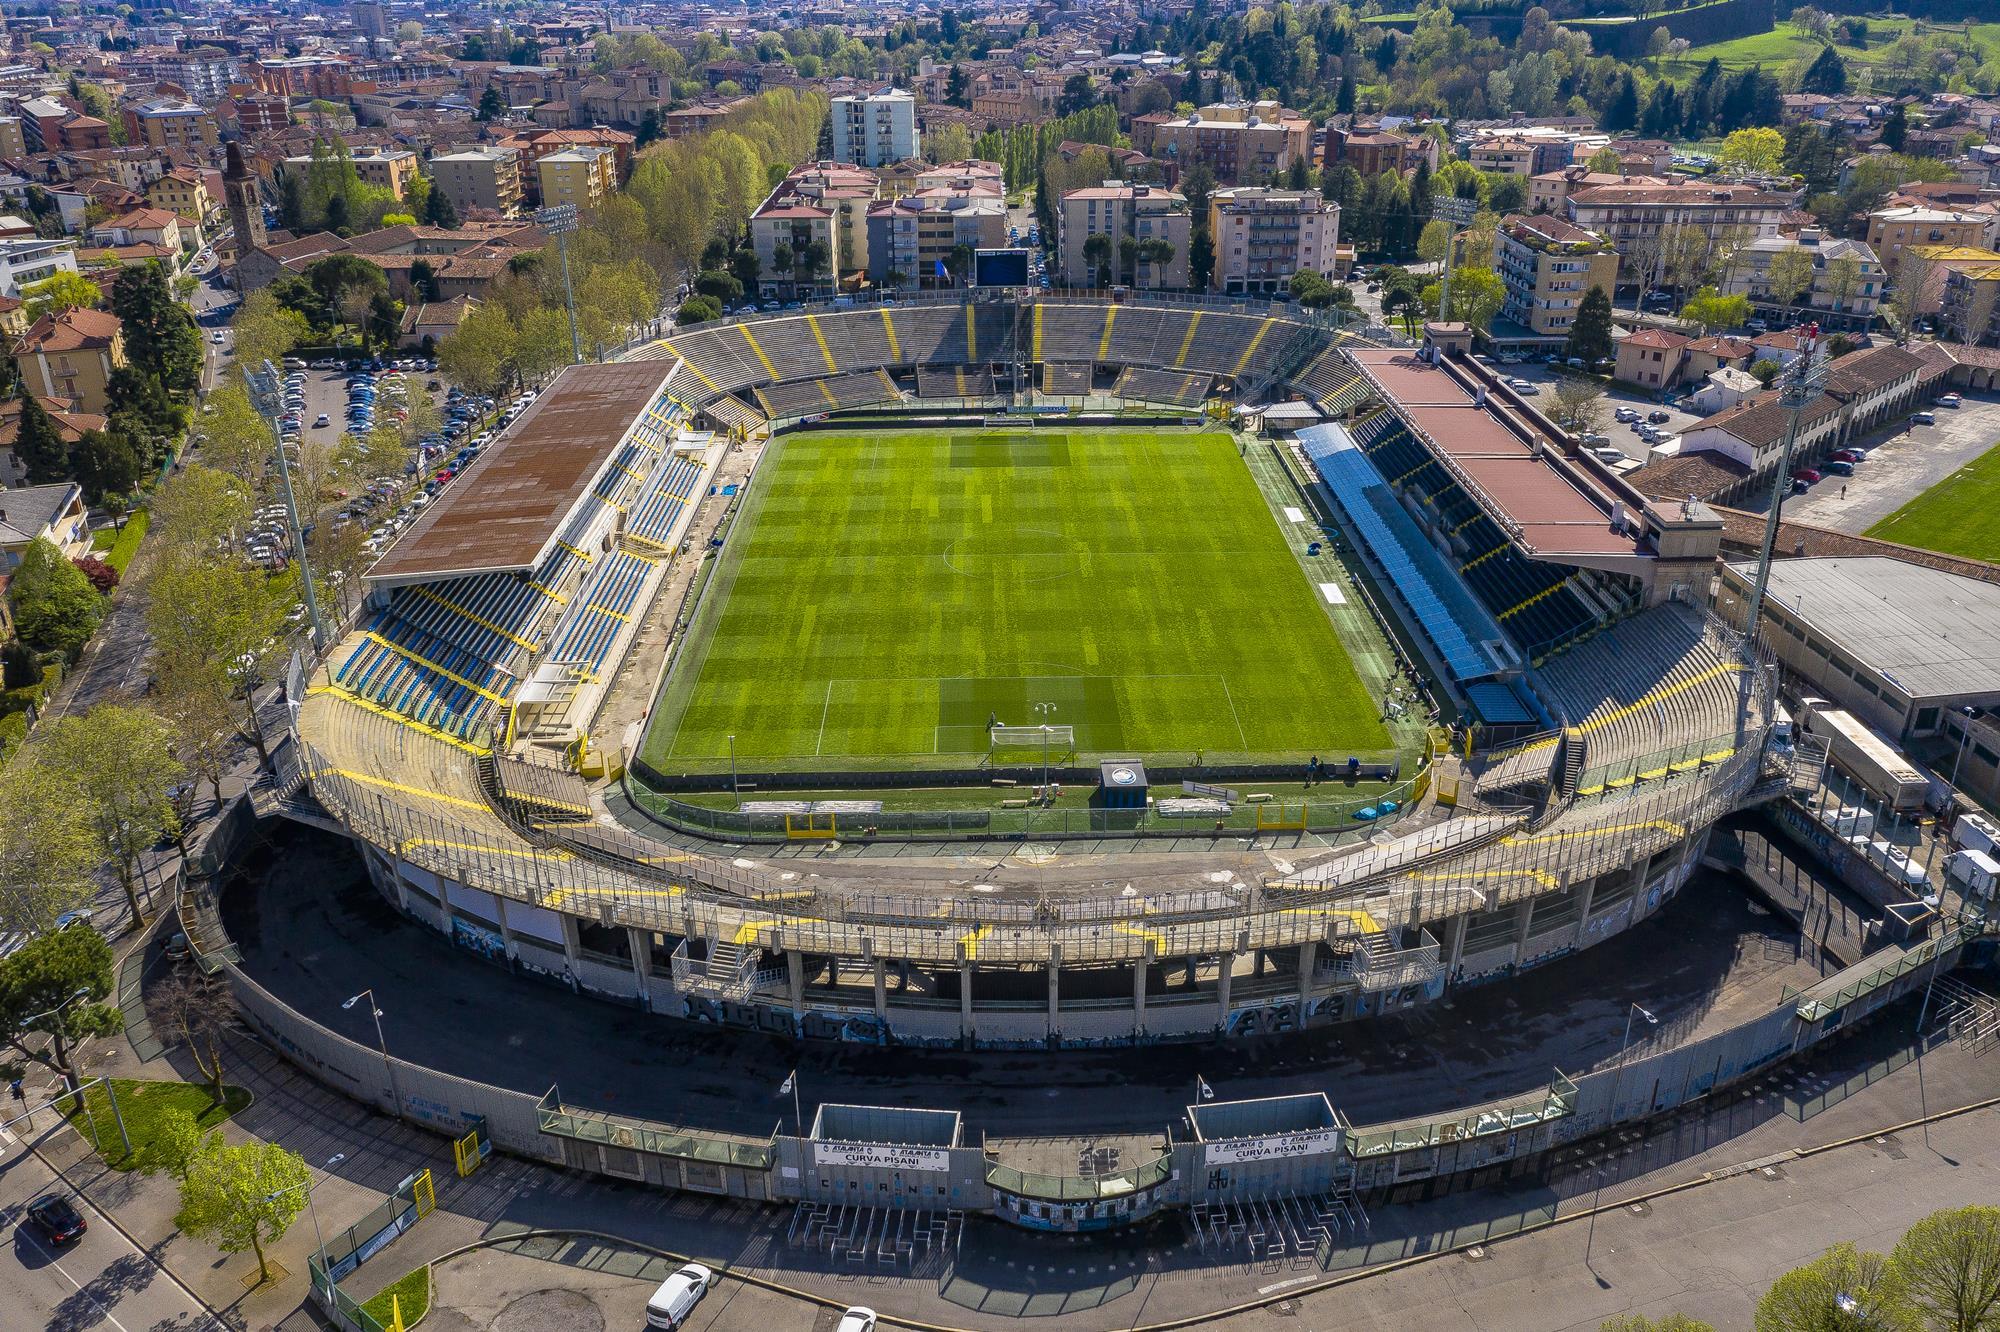 Atalanta's Stadium went through many name changes and renovations in its history. This is how it looked before the last restructuring and before it became known as Gewiss Stadium